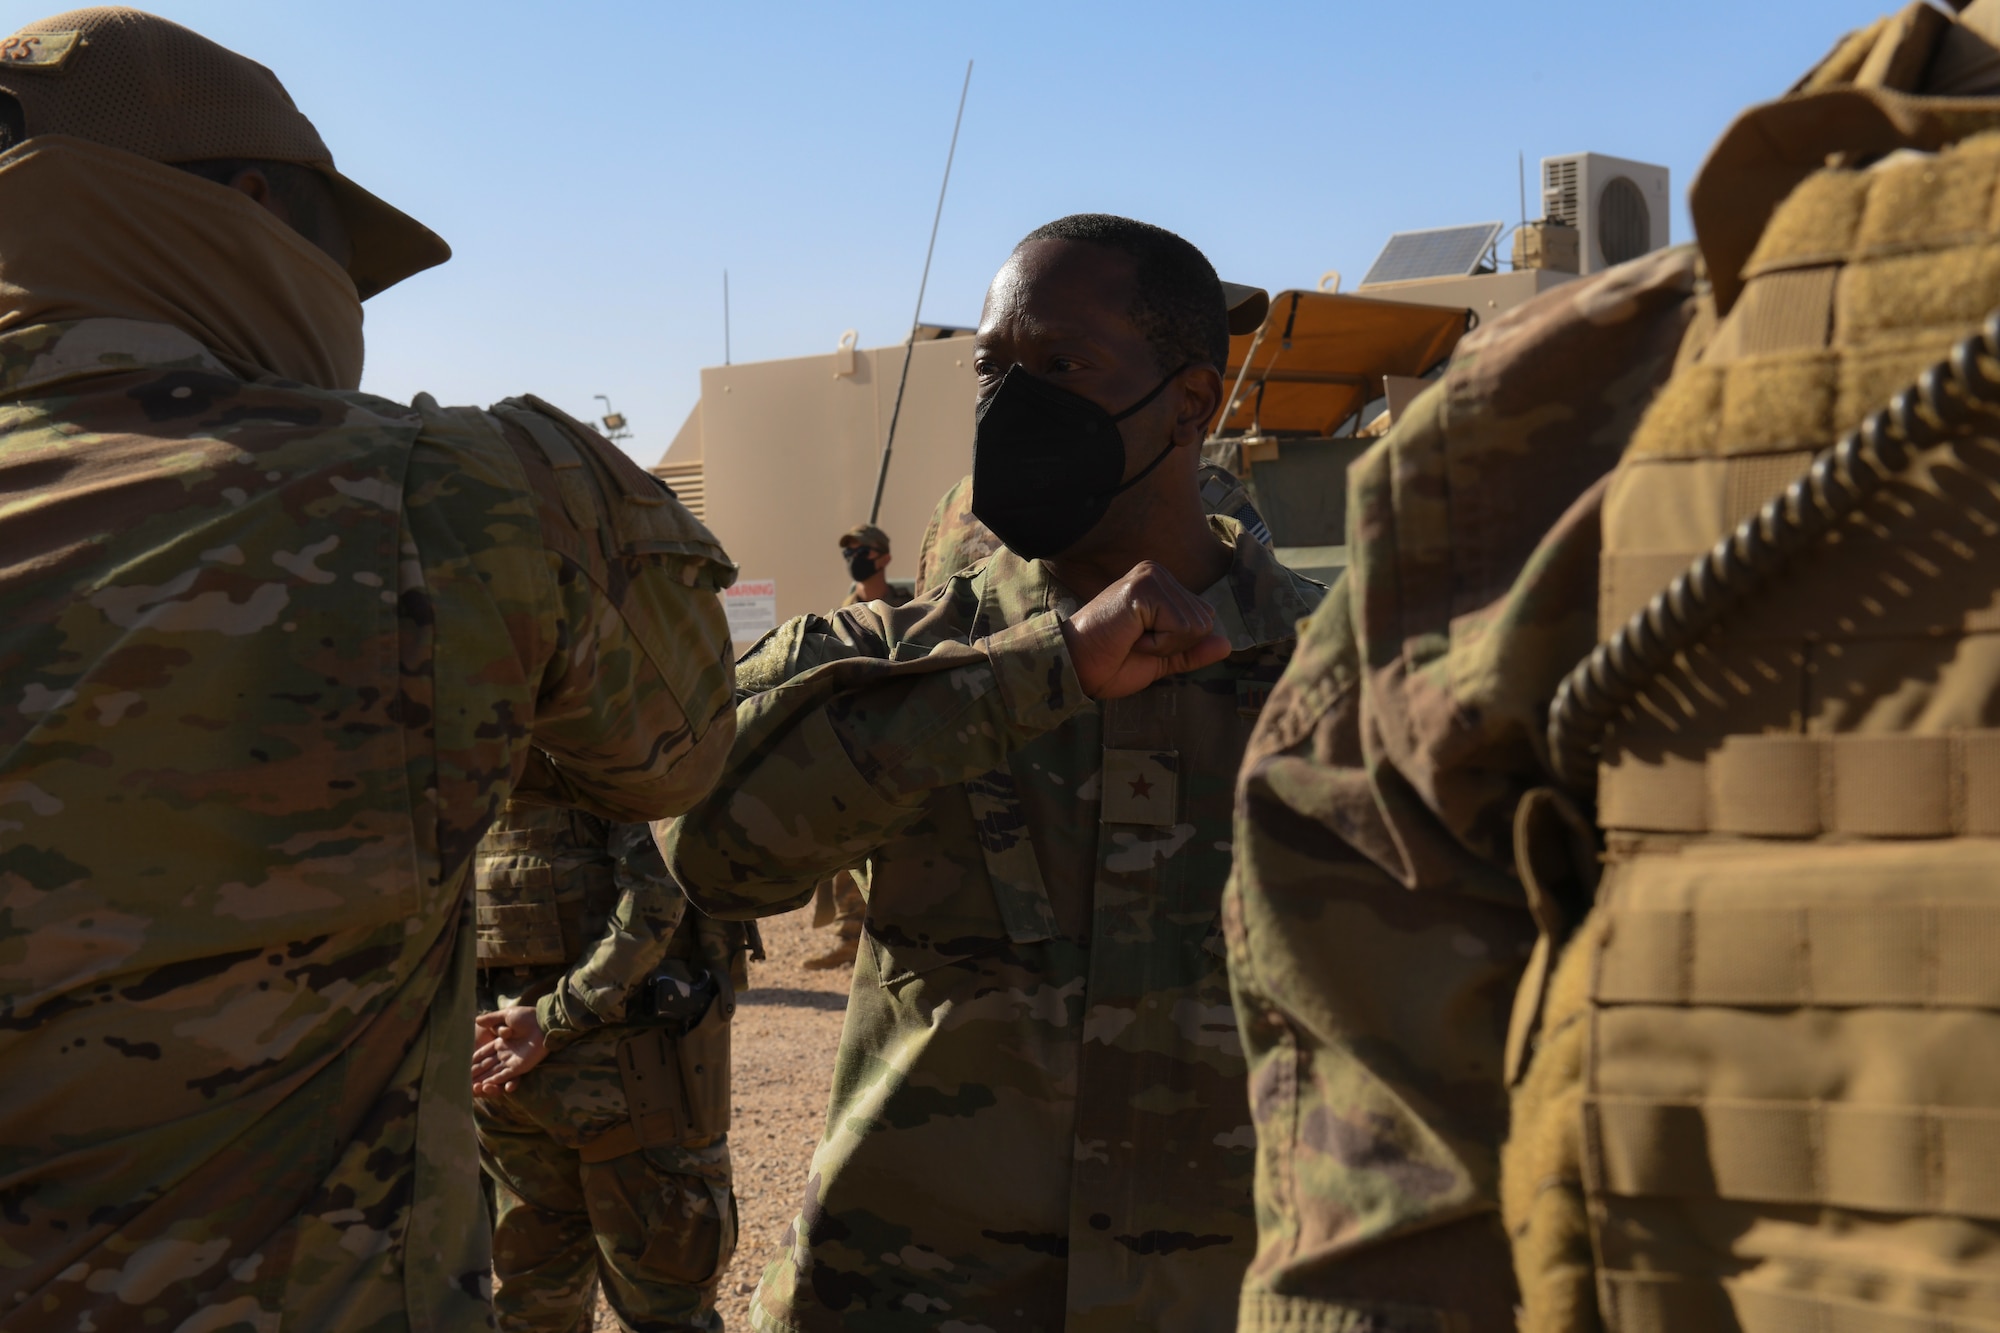 U.S. Air Force Brig. Gen. Ronald E. Jolly Sr., Headquarters U.S. Air Forces in Europe and Air Forces Africa director of logistics, engineering and force protection, bumps elbows with a 409th Expeditionary Security Forces Squadron member during a visit to Nigerien Air Base 201, Agadez, Niger, Feb. 6, 2021. The visit focused on security forces, force protection elements across all U.S. Africa Command locations, to include on-going civil engineering projects that relate to or enhance force protection at each location. (U.S. Air Force photo by Senior Airman Gabrielle Winn)